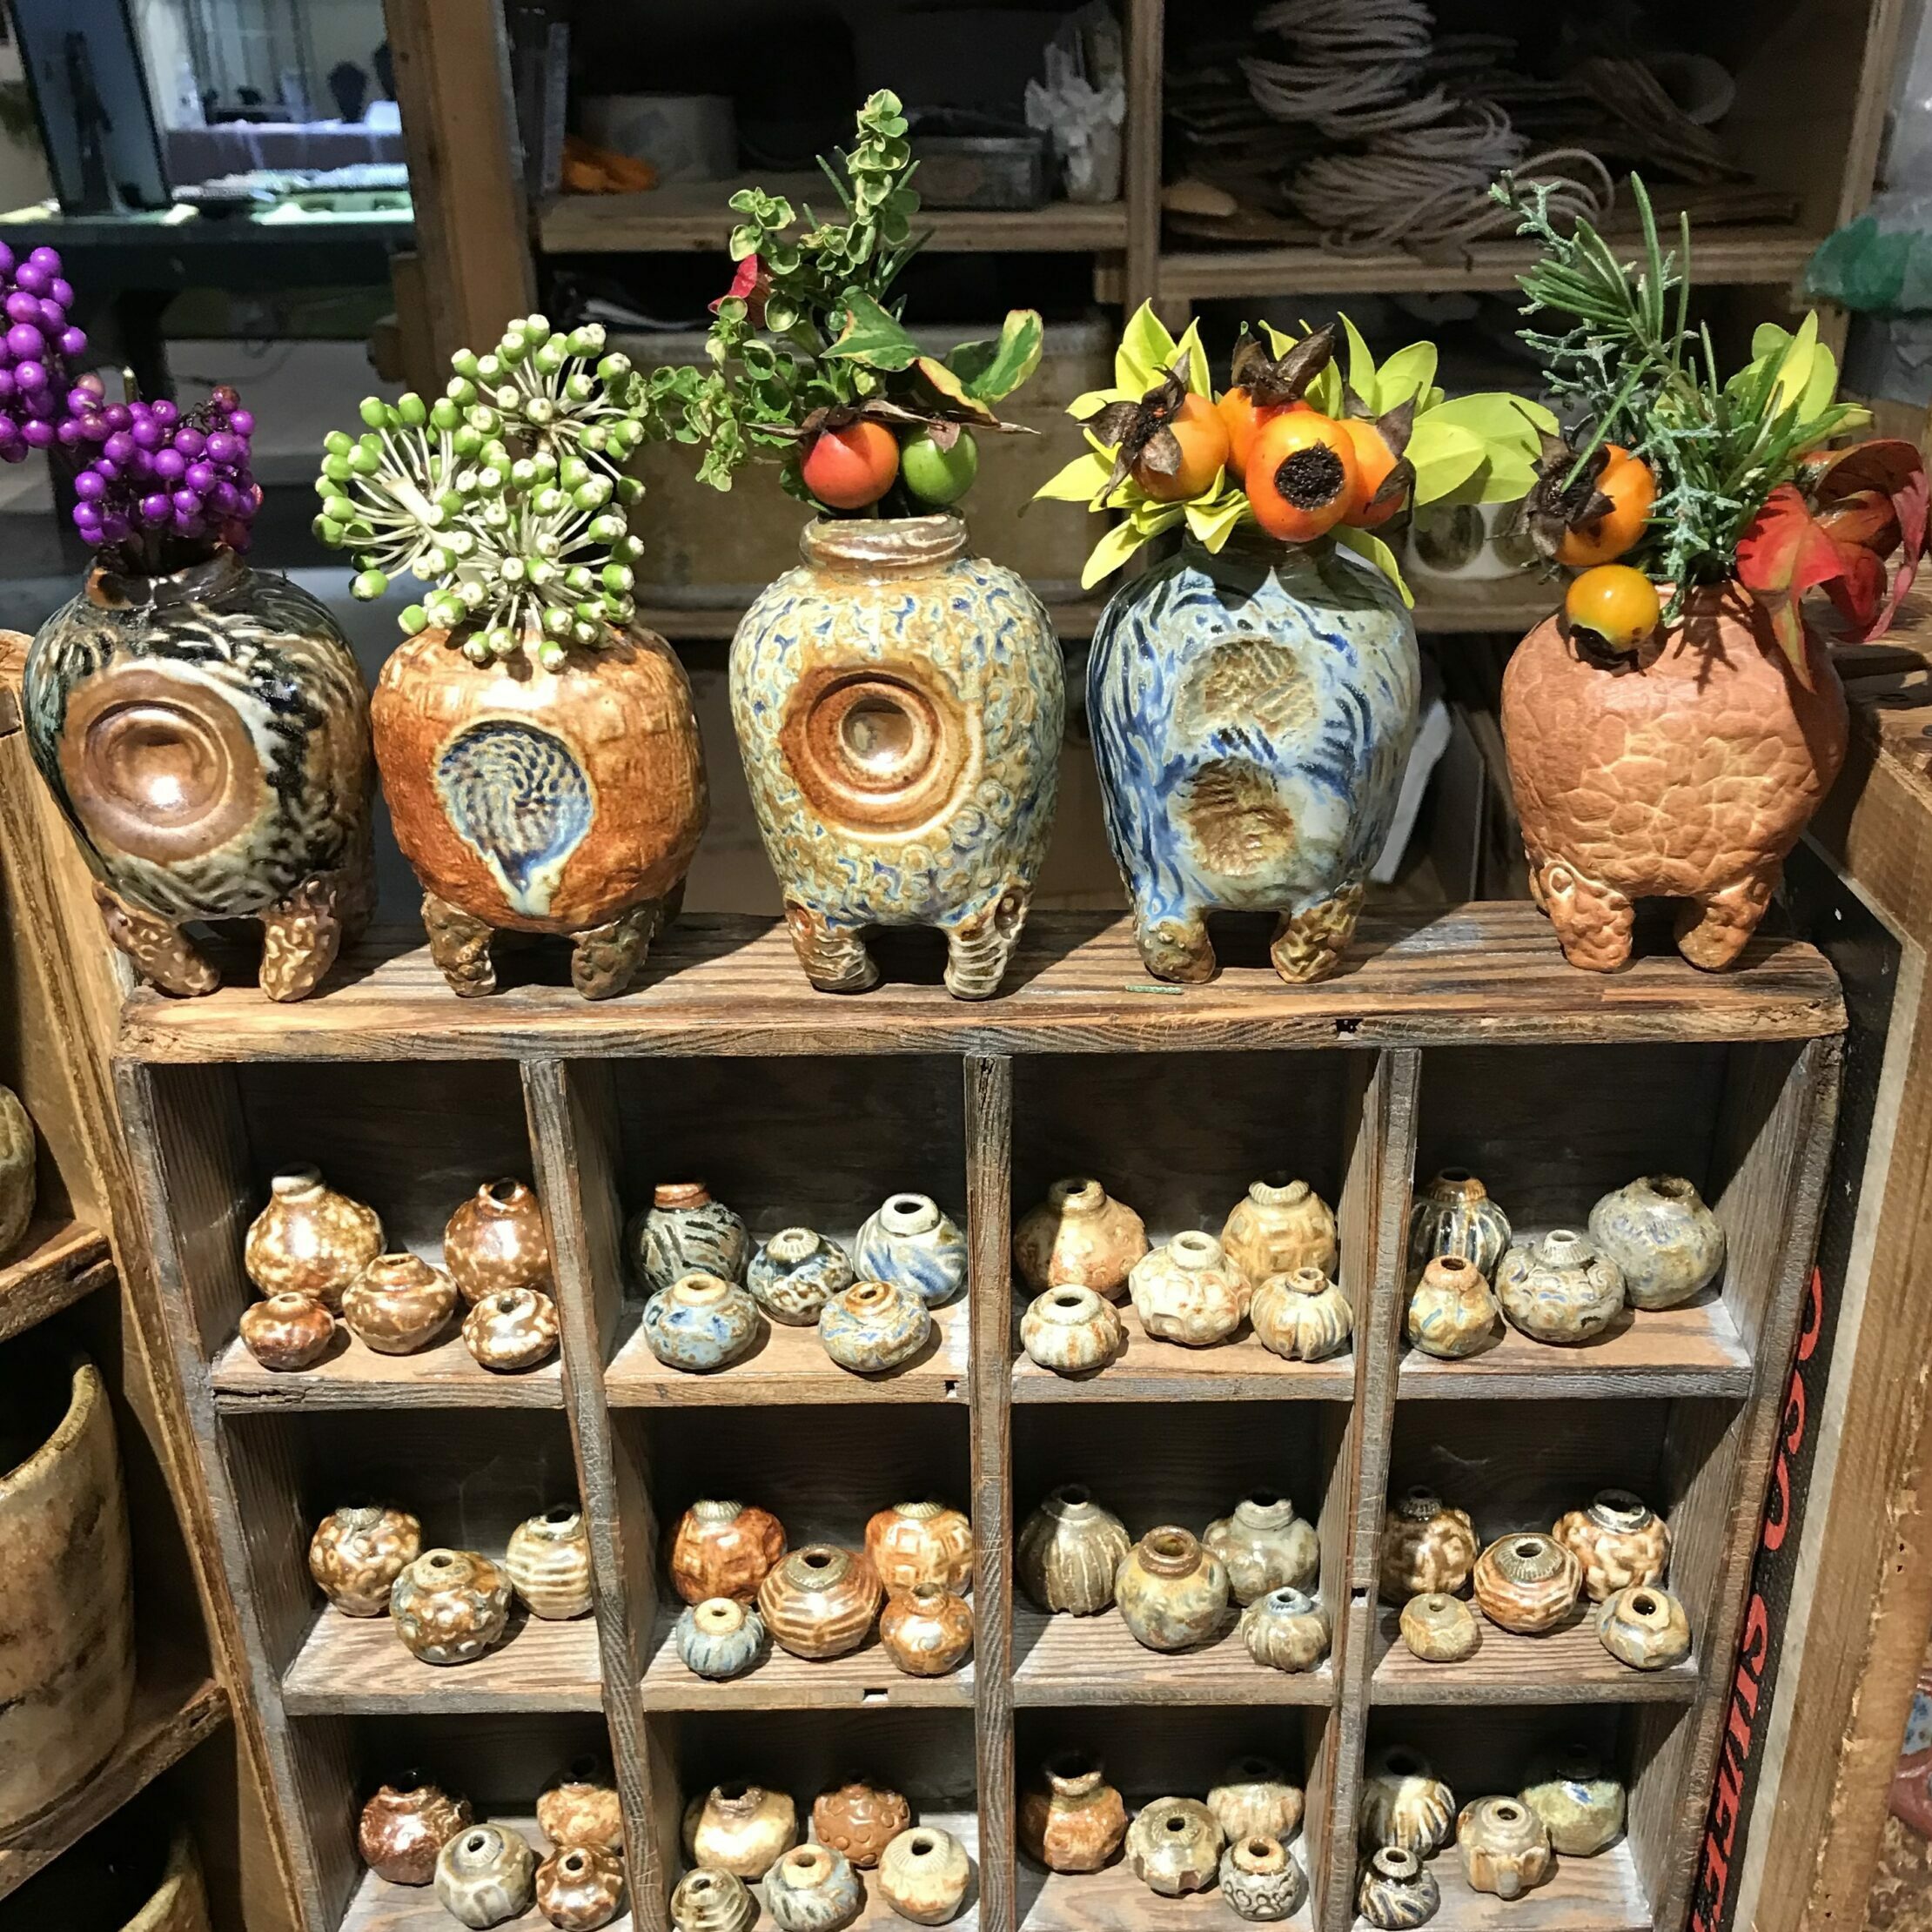 a display of clay vases from clay designs.benning a craftsperson in pike place market